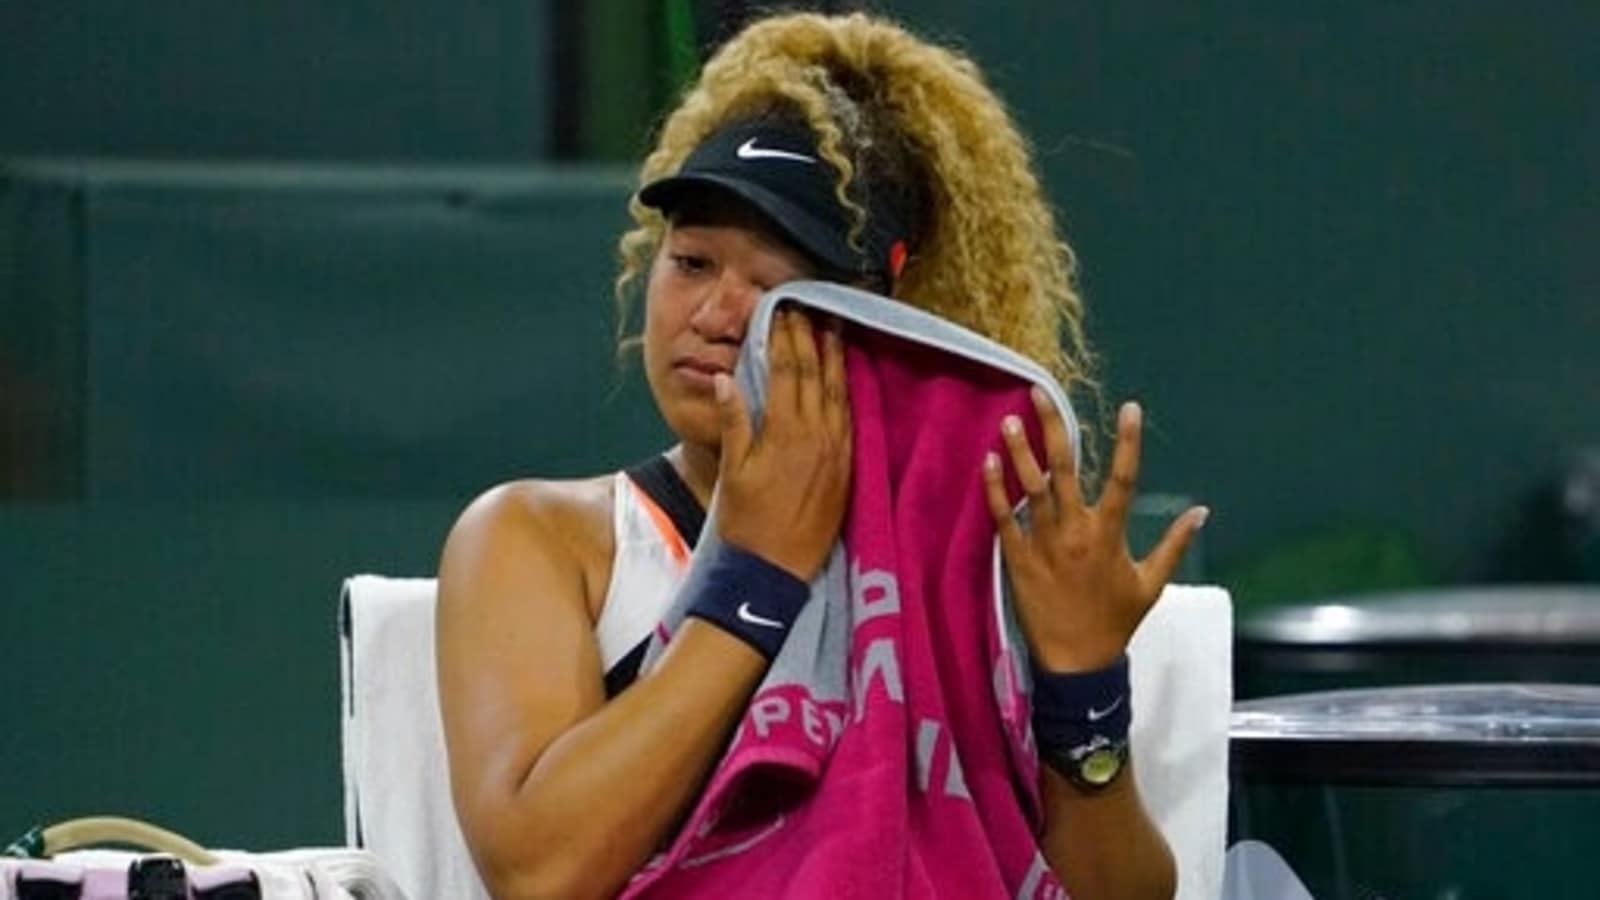 I just want to say thank you Heckler leaves Osaka in tears at Indian Wells Tennis News